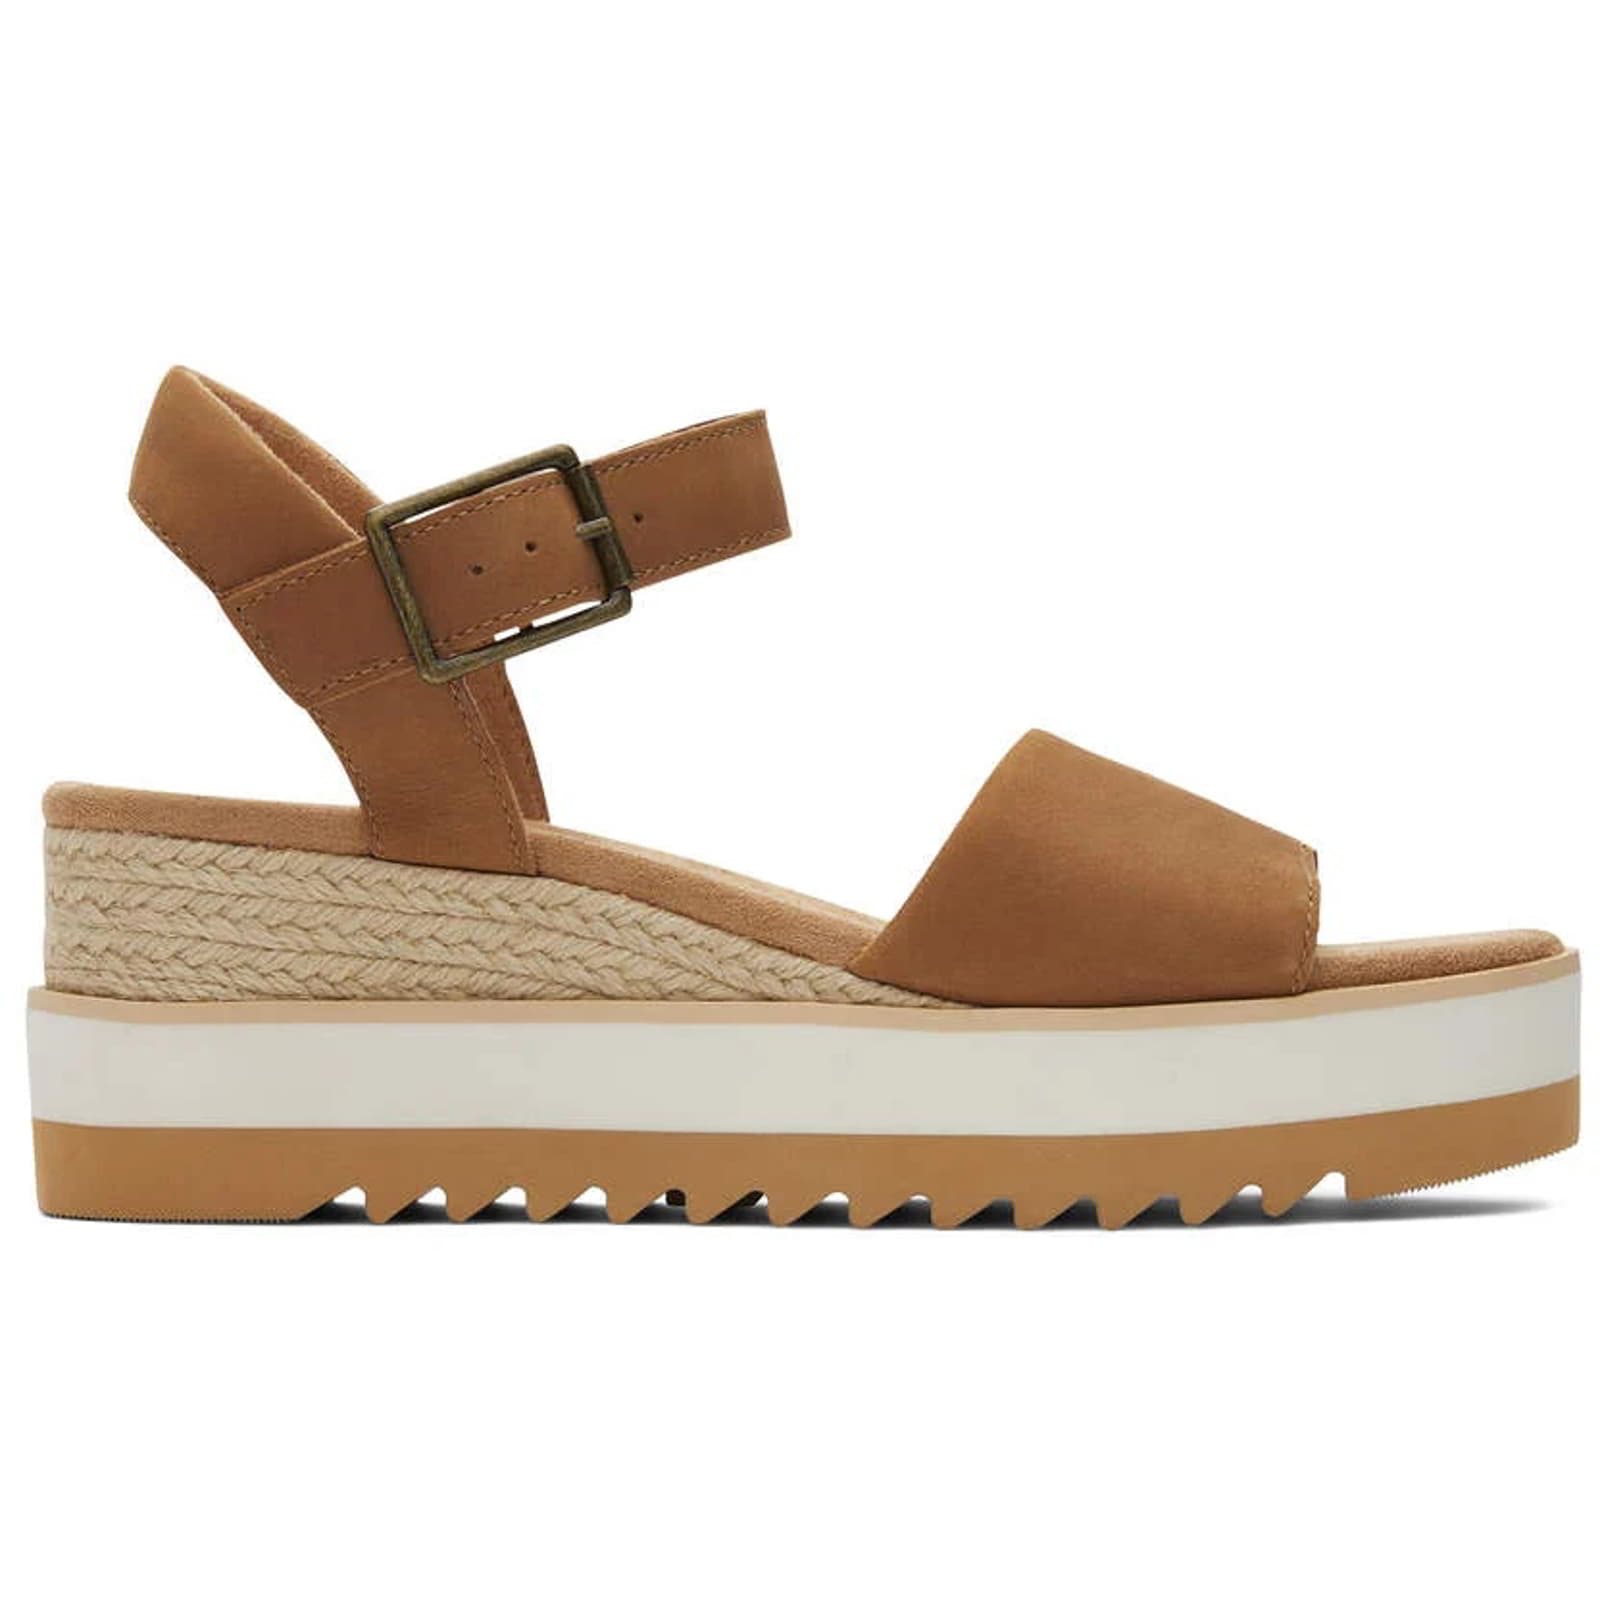 Toms Womens Diana Leather Wedge Sandals - UK 5